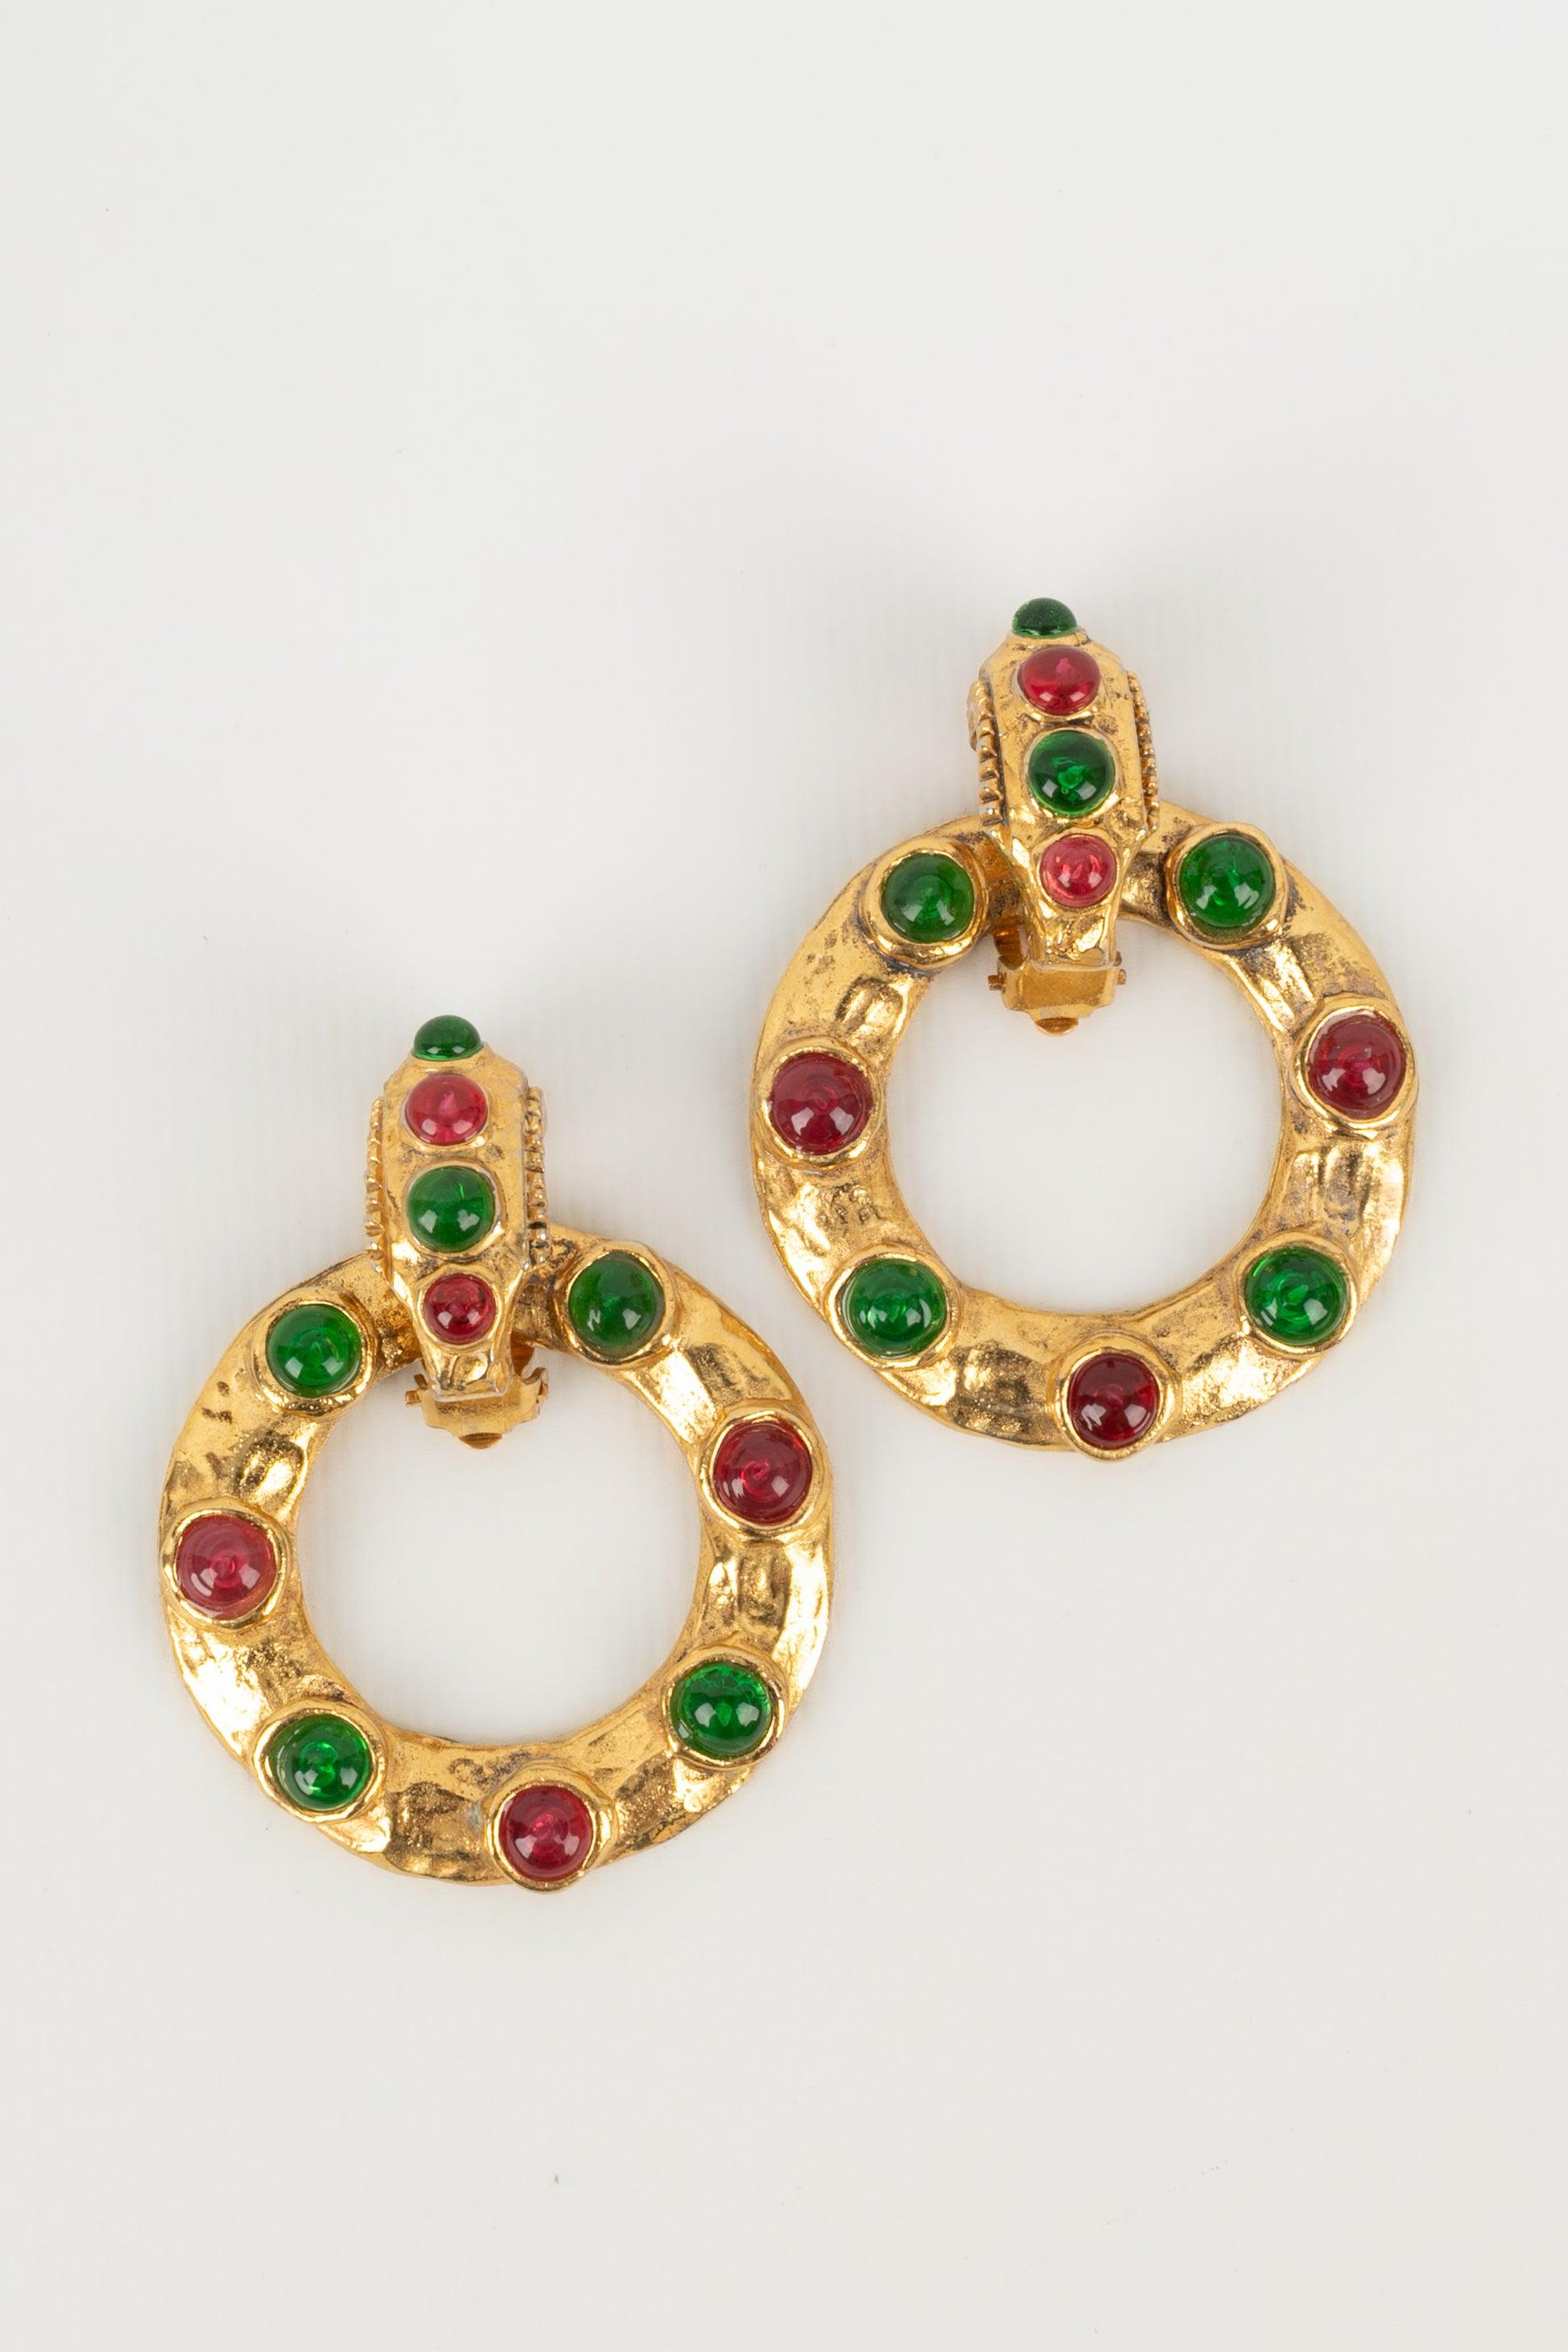 Chanel - (Made in France) Beaten golden metal large hoop earrings with glass paste cabochons.

Additional information:
Condition: Very good condition
Dimensions: Height: 5.5 cm

Seller Reference: BOB80
